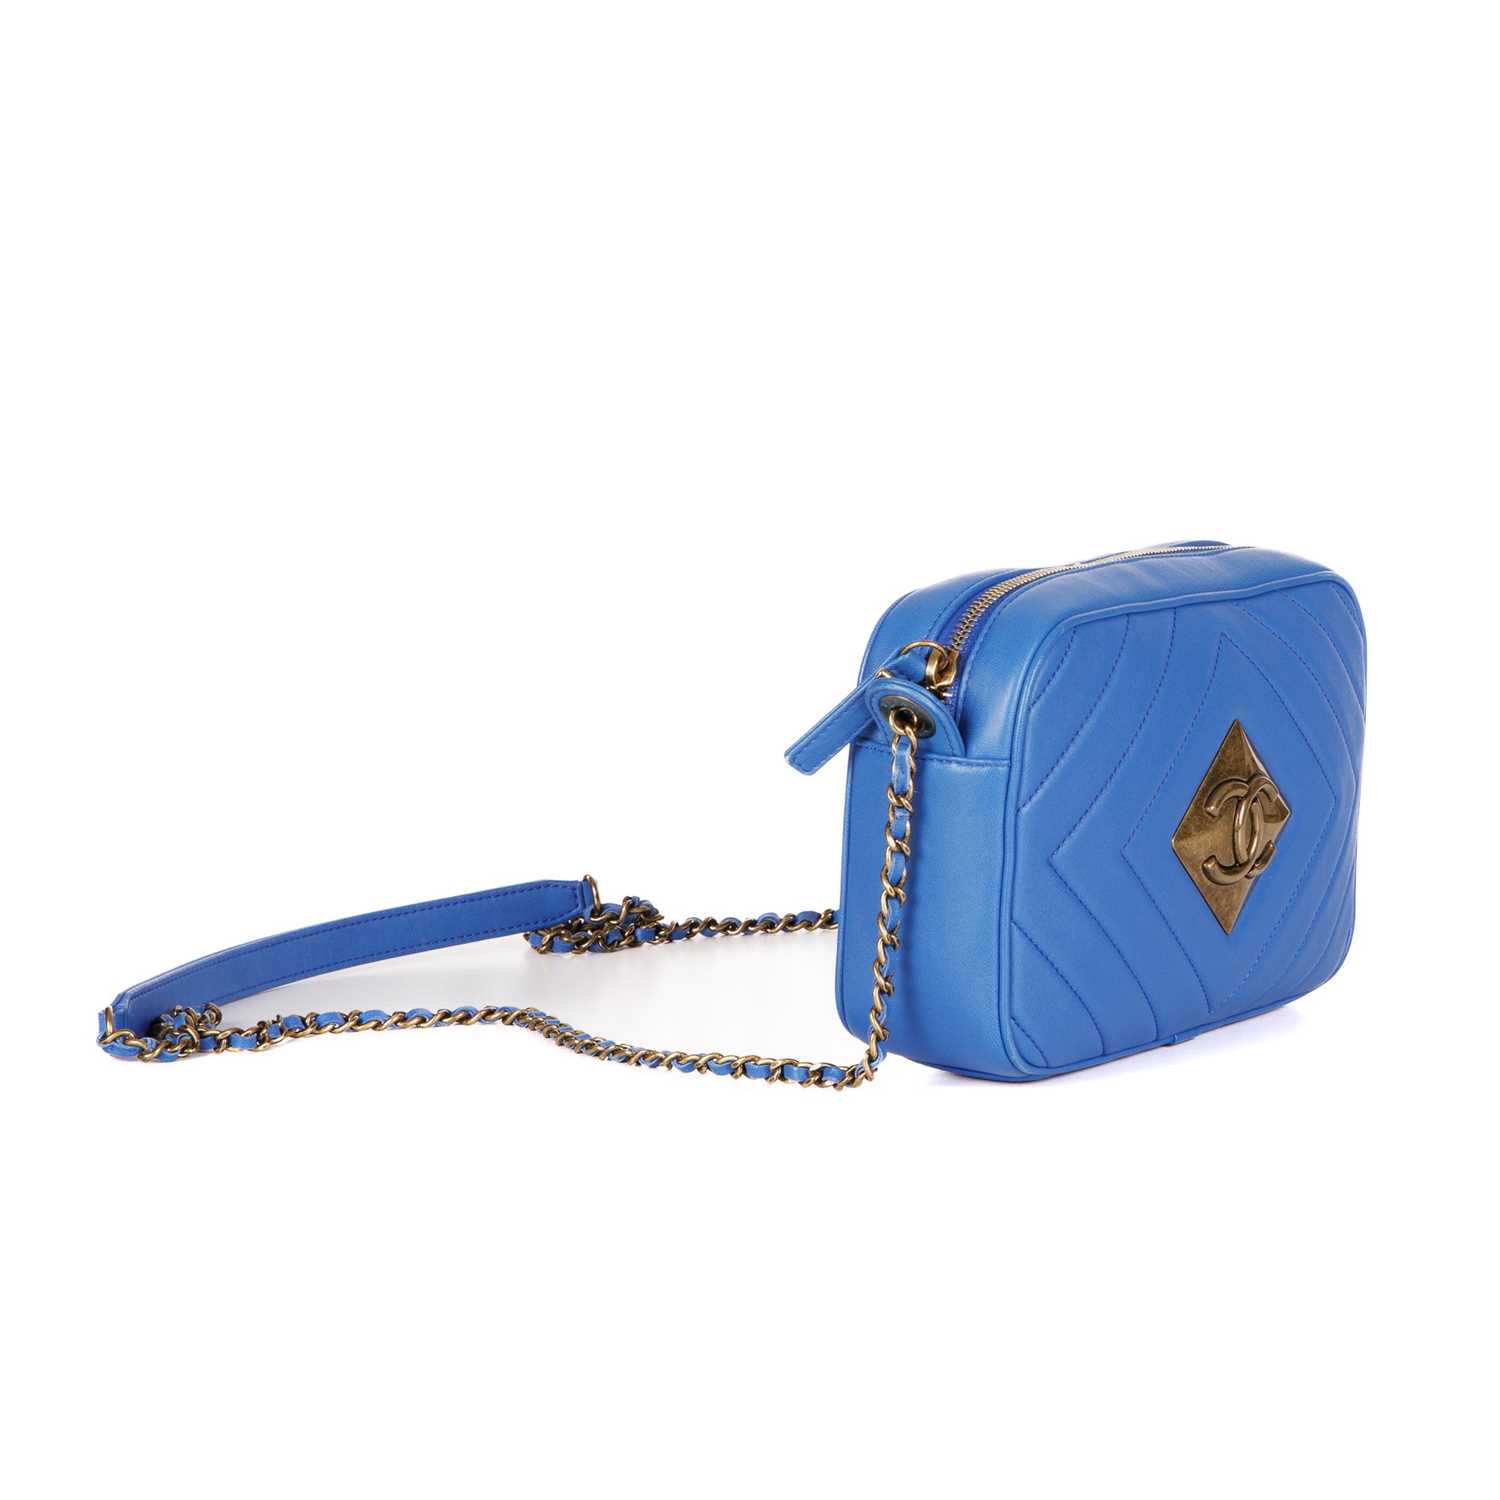 Chanel, a Pyramid camera bag, featuring a blue diamond-quilted leather exterior, with aged gold-tone - Image 3 of 4